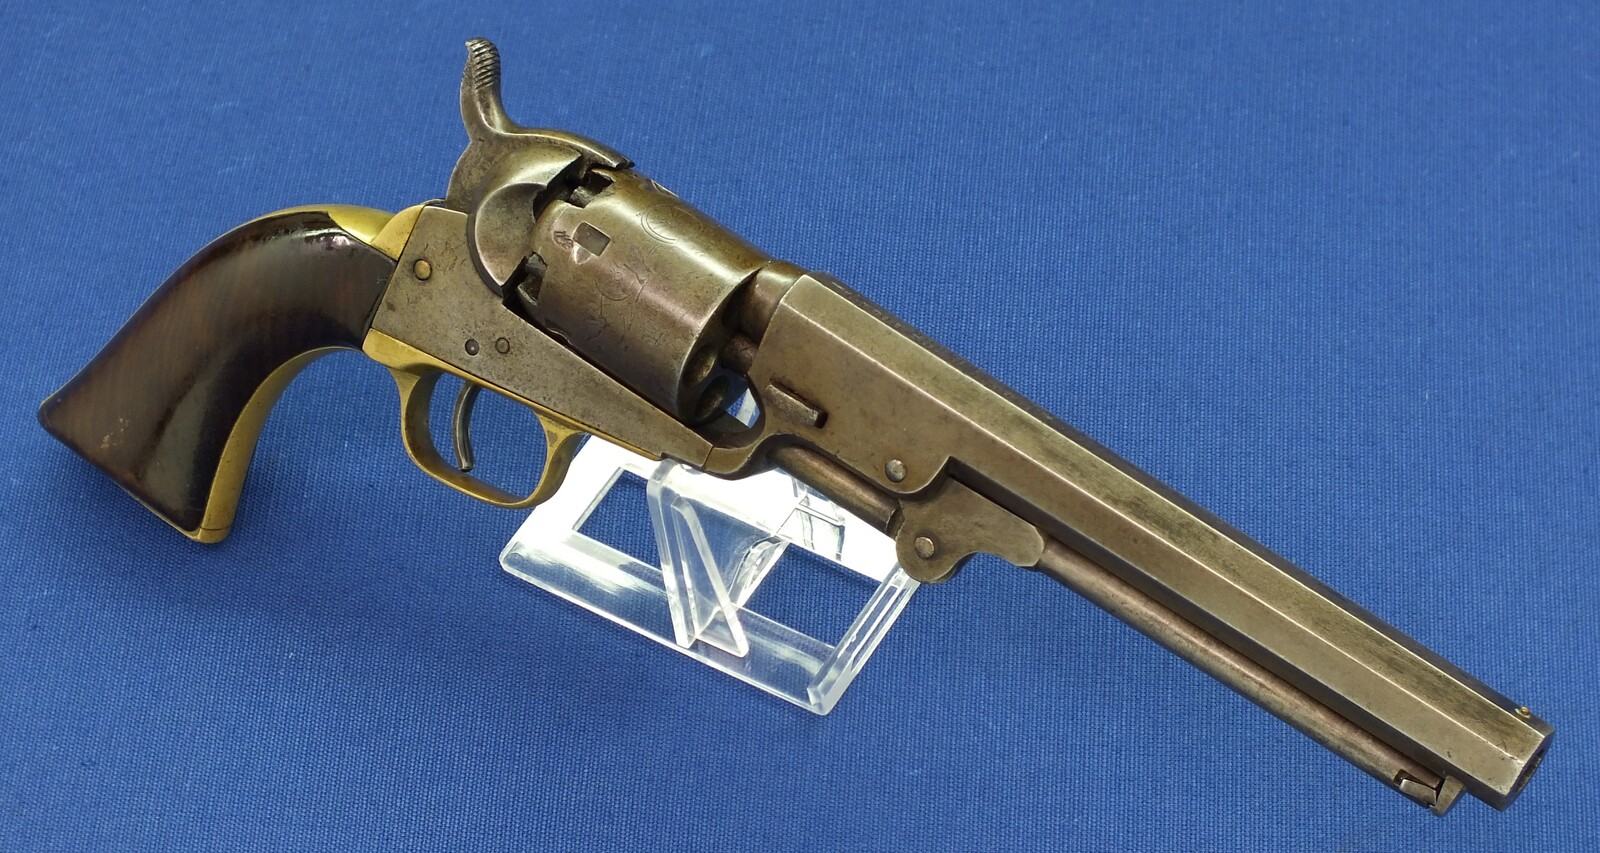 A rare antique English Colt Model 1849 London Pocket X percussion revolver. 5 shot, 31 caliber. 6 inch barrel with 2 line London address. Length 29,5cm. In very good condition. 